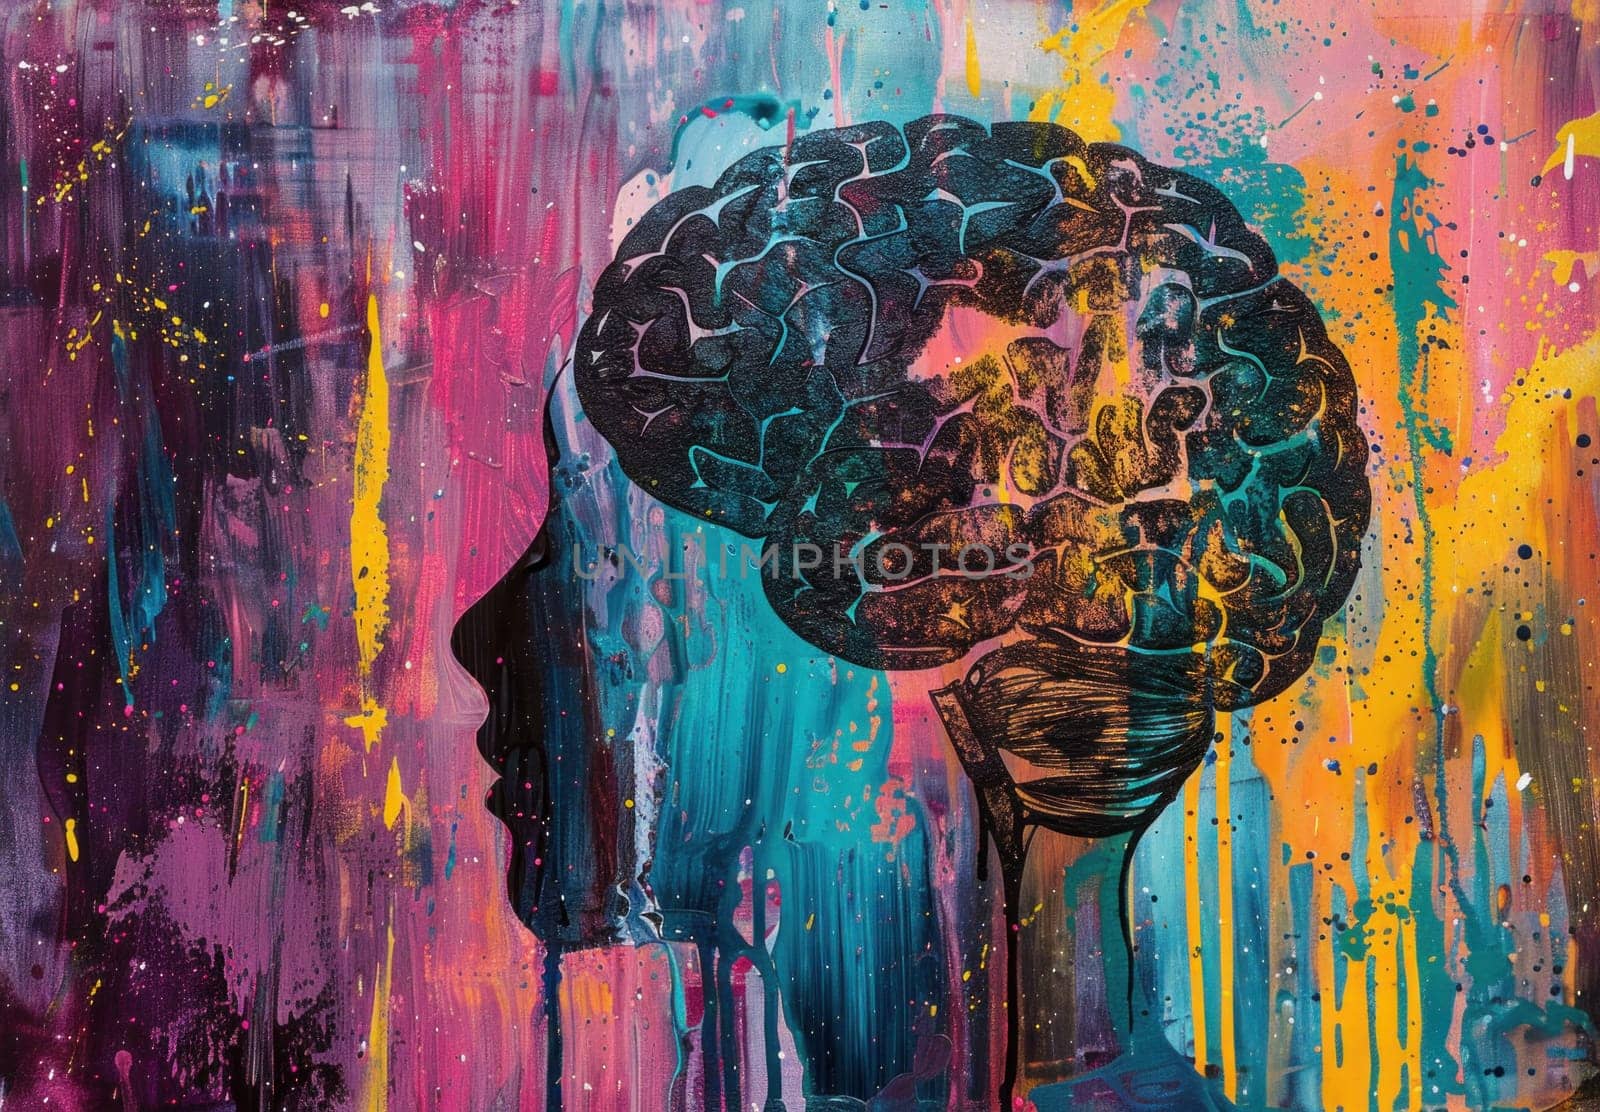 Abstract portrait of woman's brain on colorful background representing beauty, art and medical science